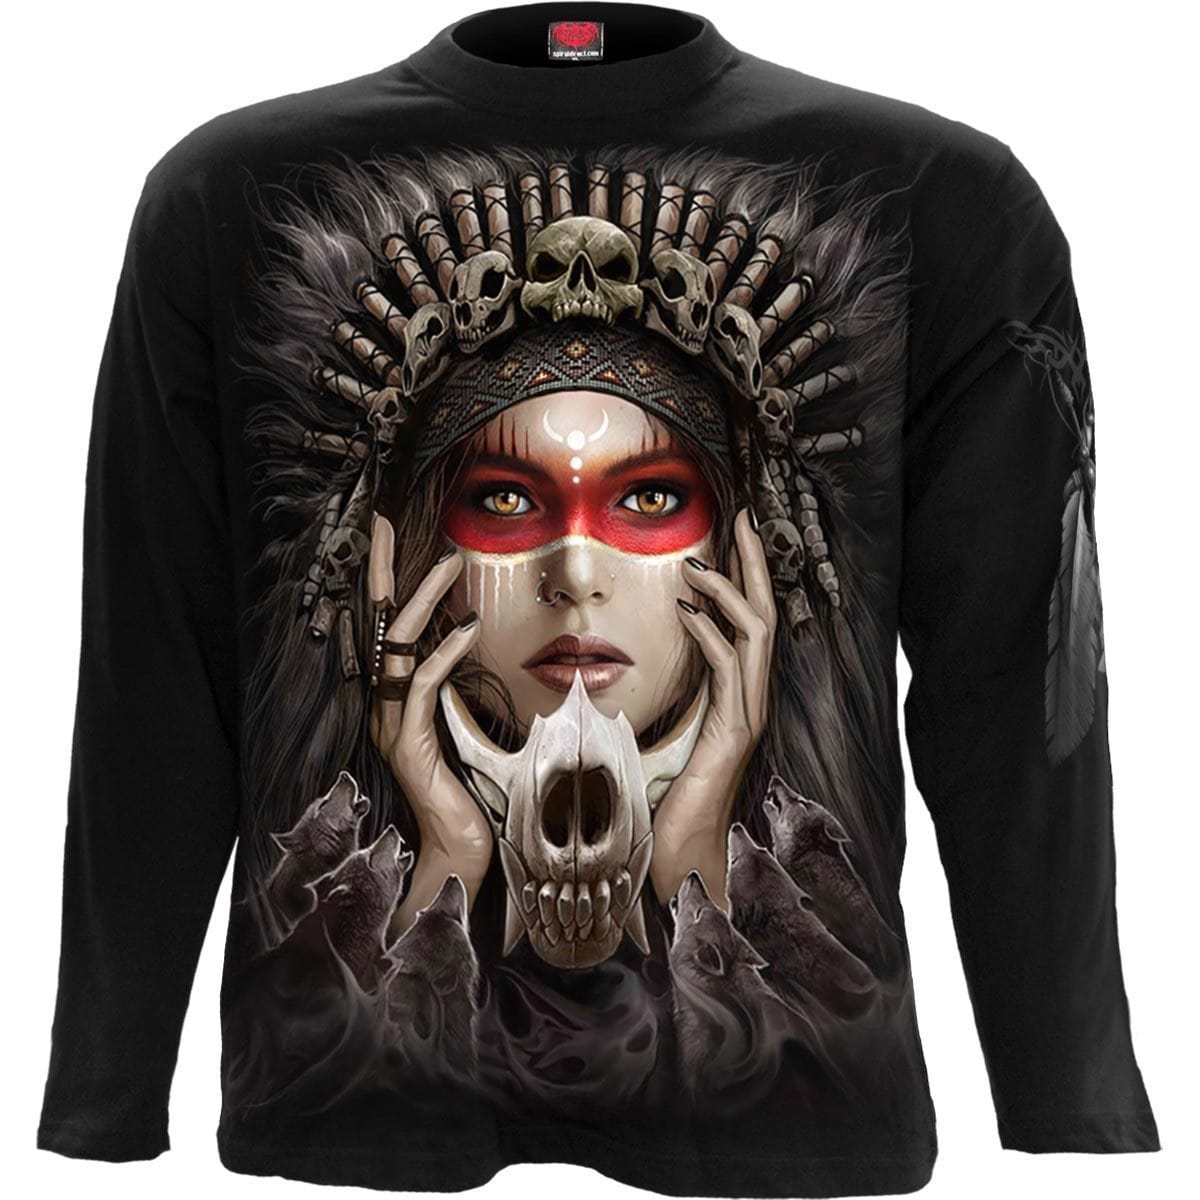 CRY OF THE WOLF - Longsleeve T-Shirt Black - Spiral USA